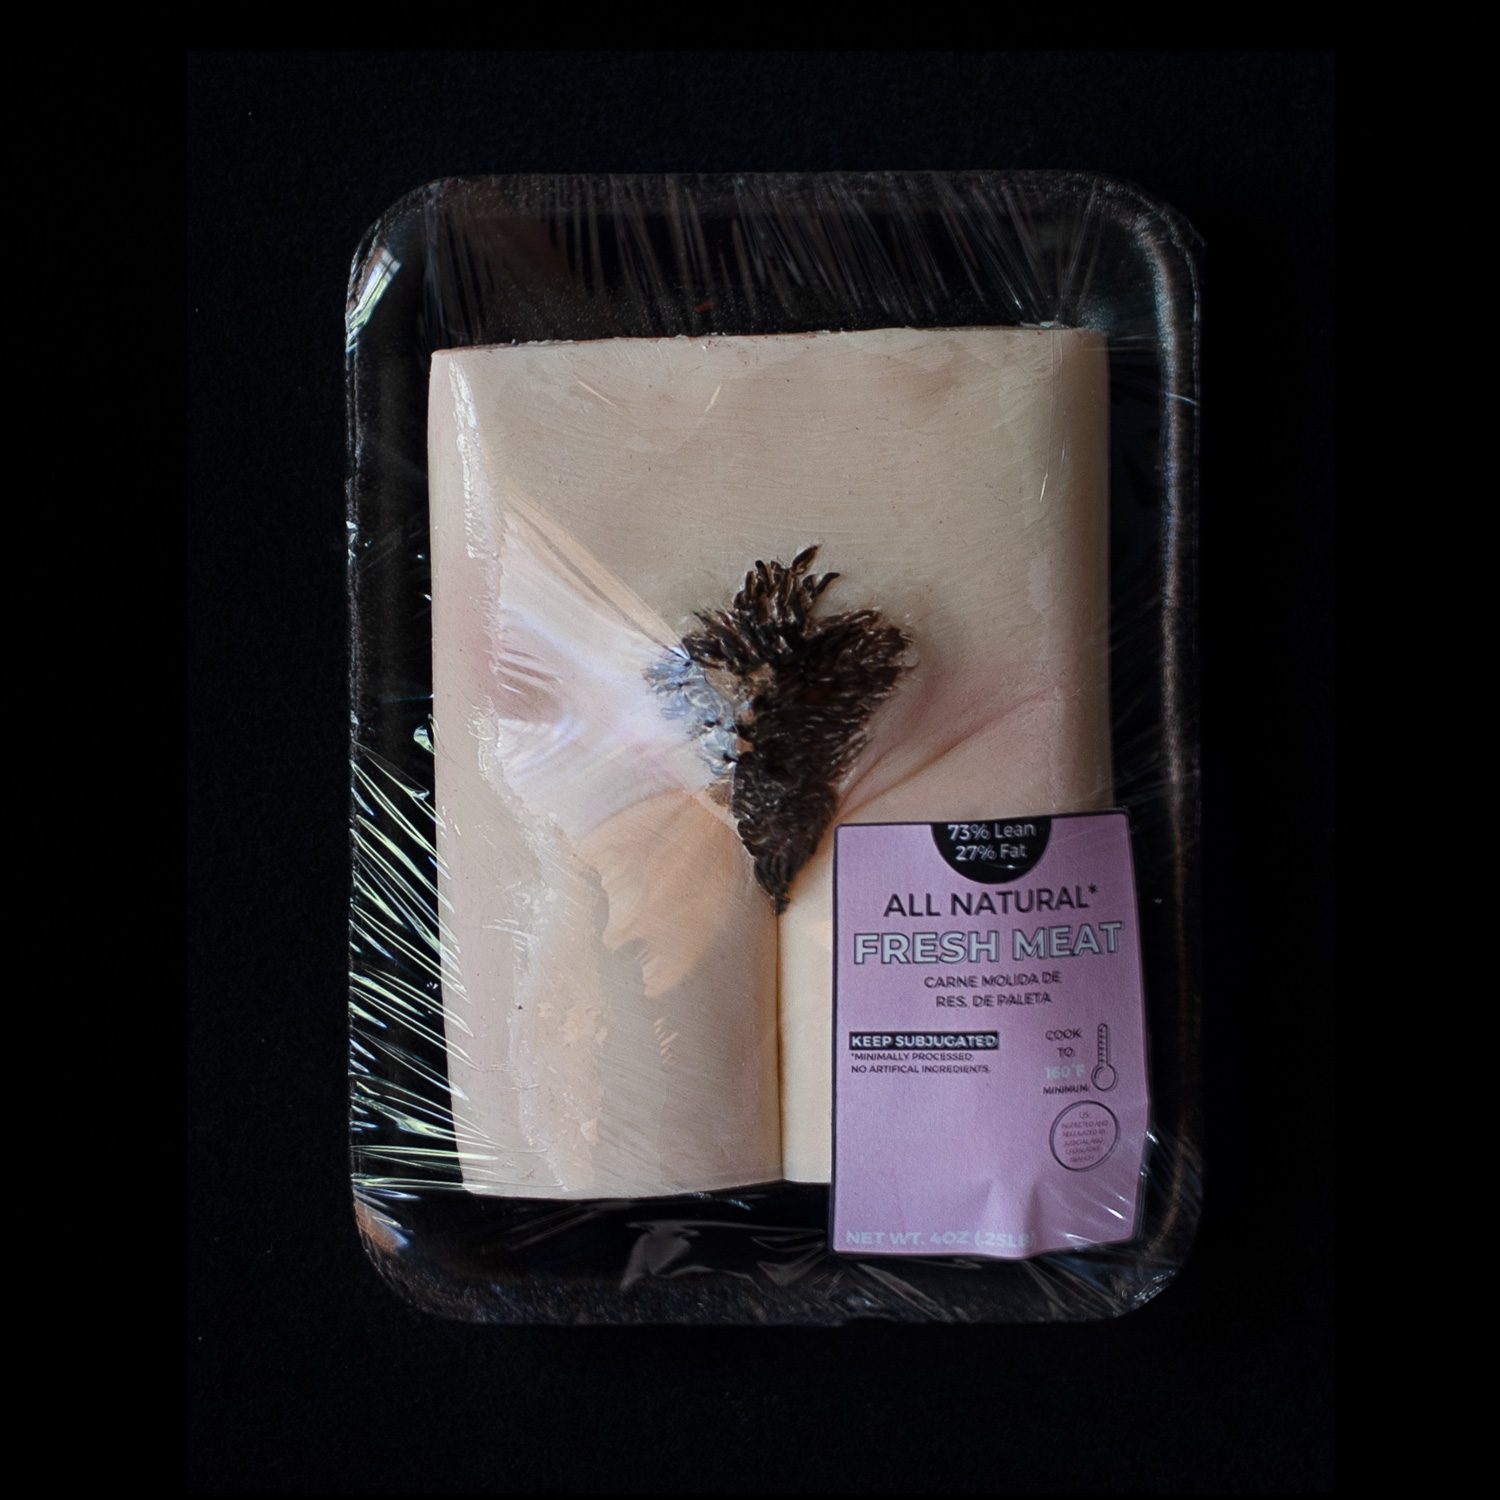 art portraying a human vulva wrapped in plastic and packaged like fresh meat with a pink label sitting on a black background 